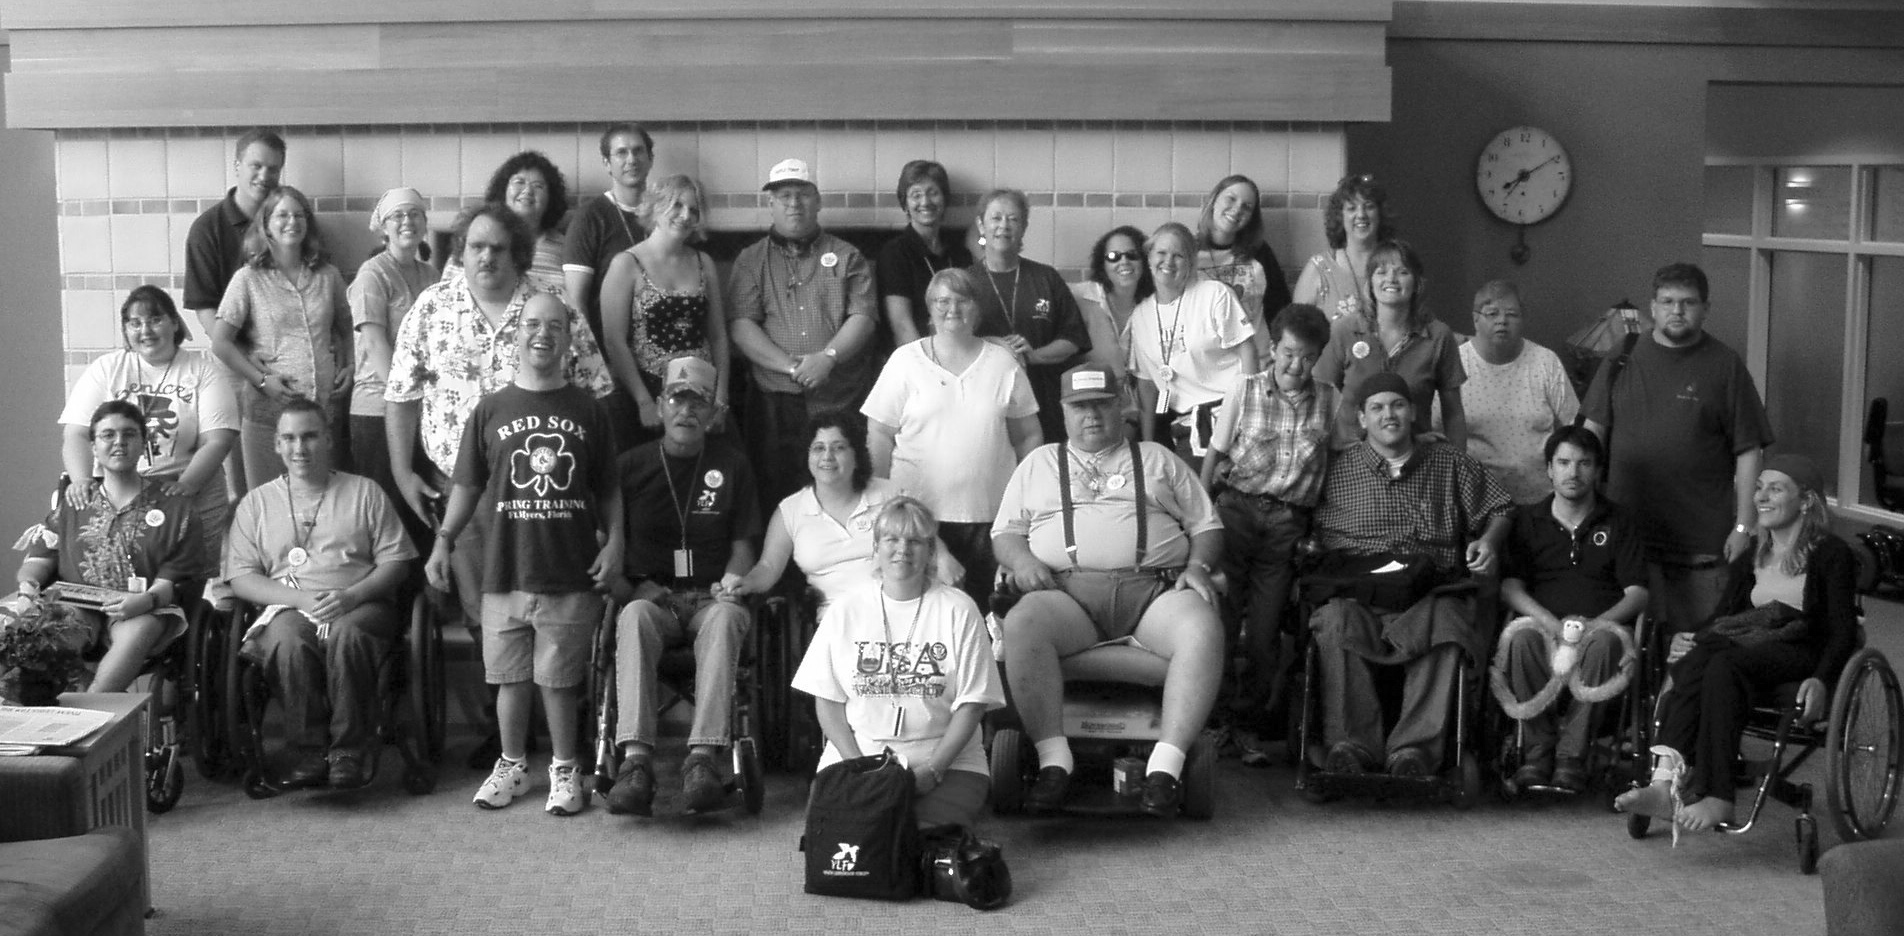 2003 volunteers pose for group photo